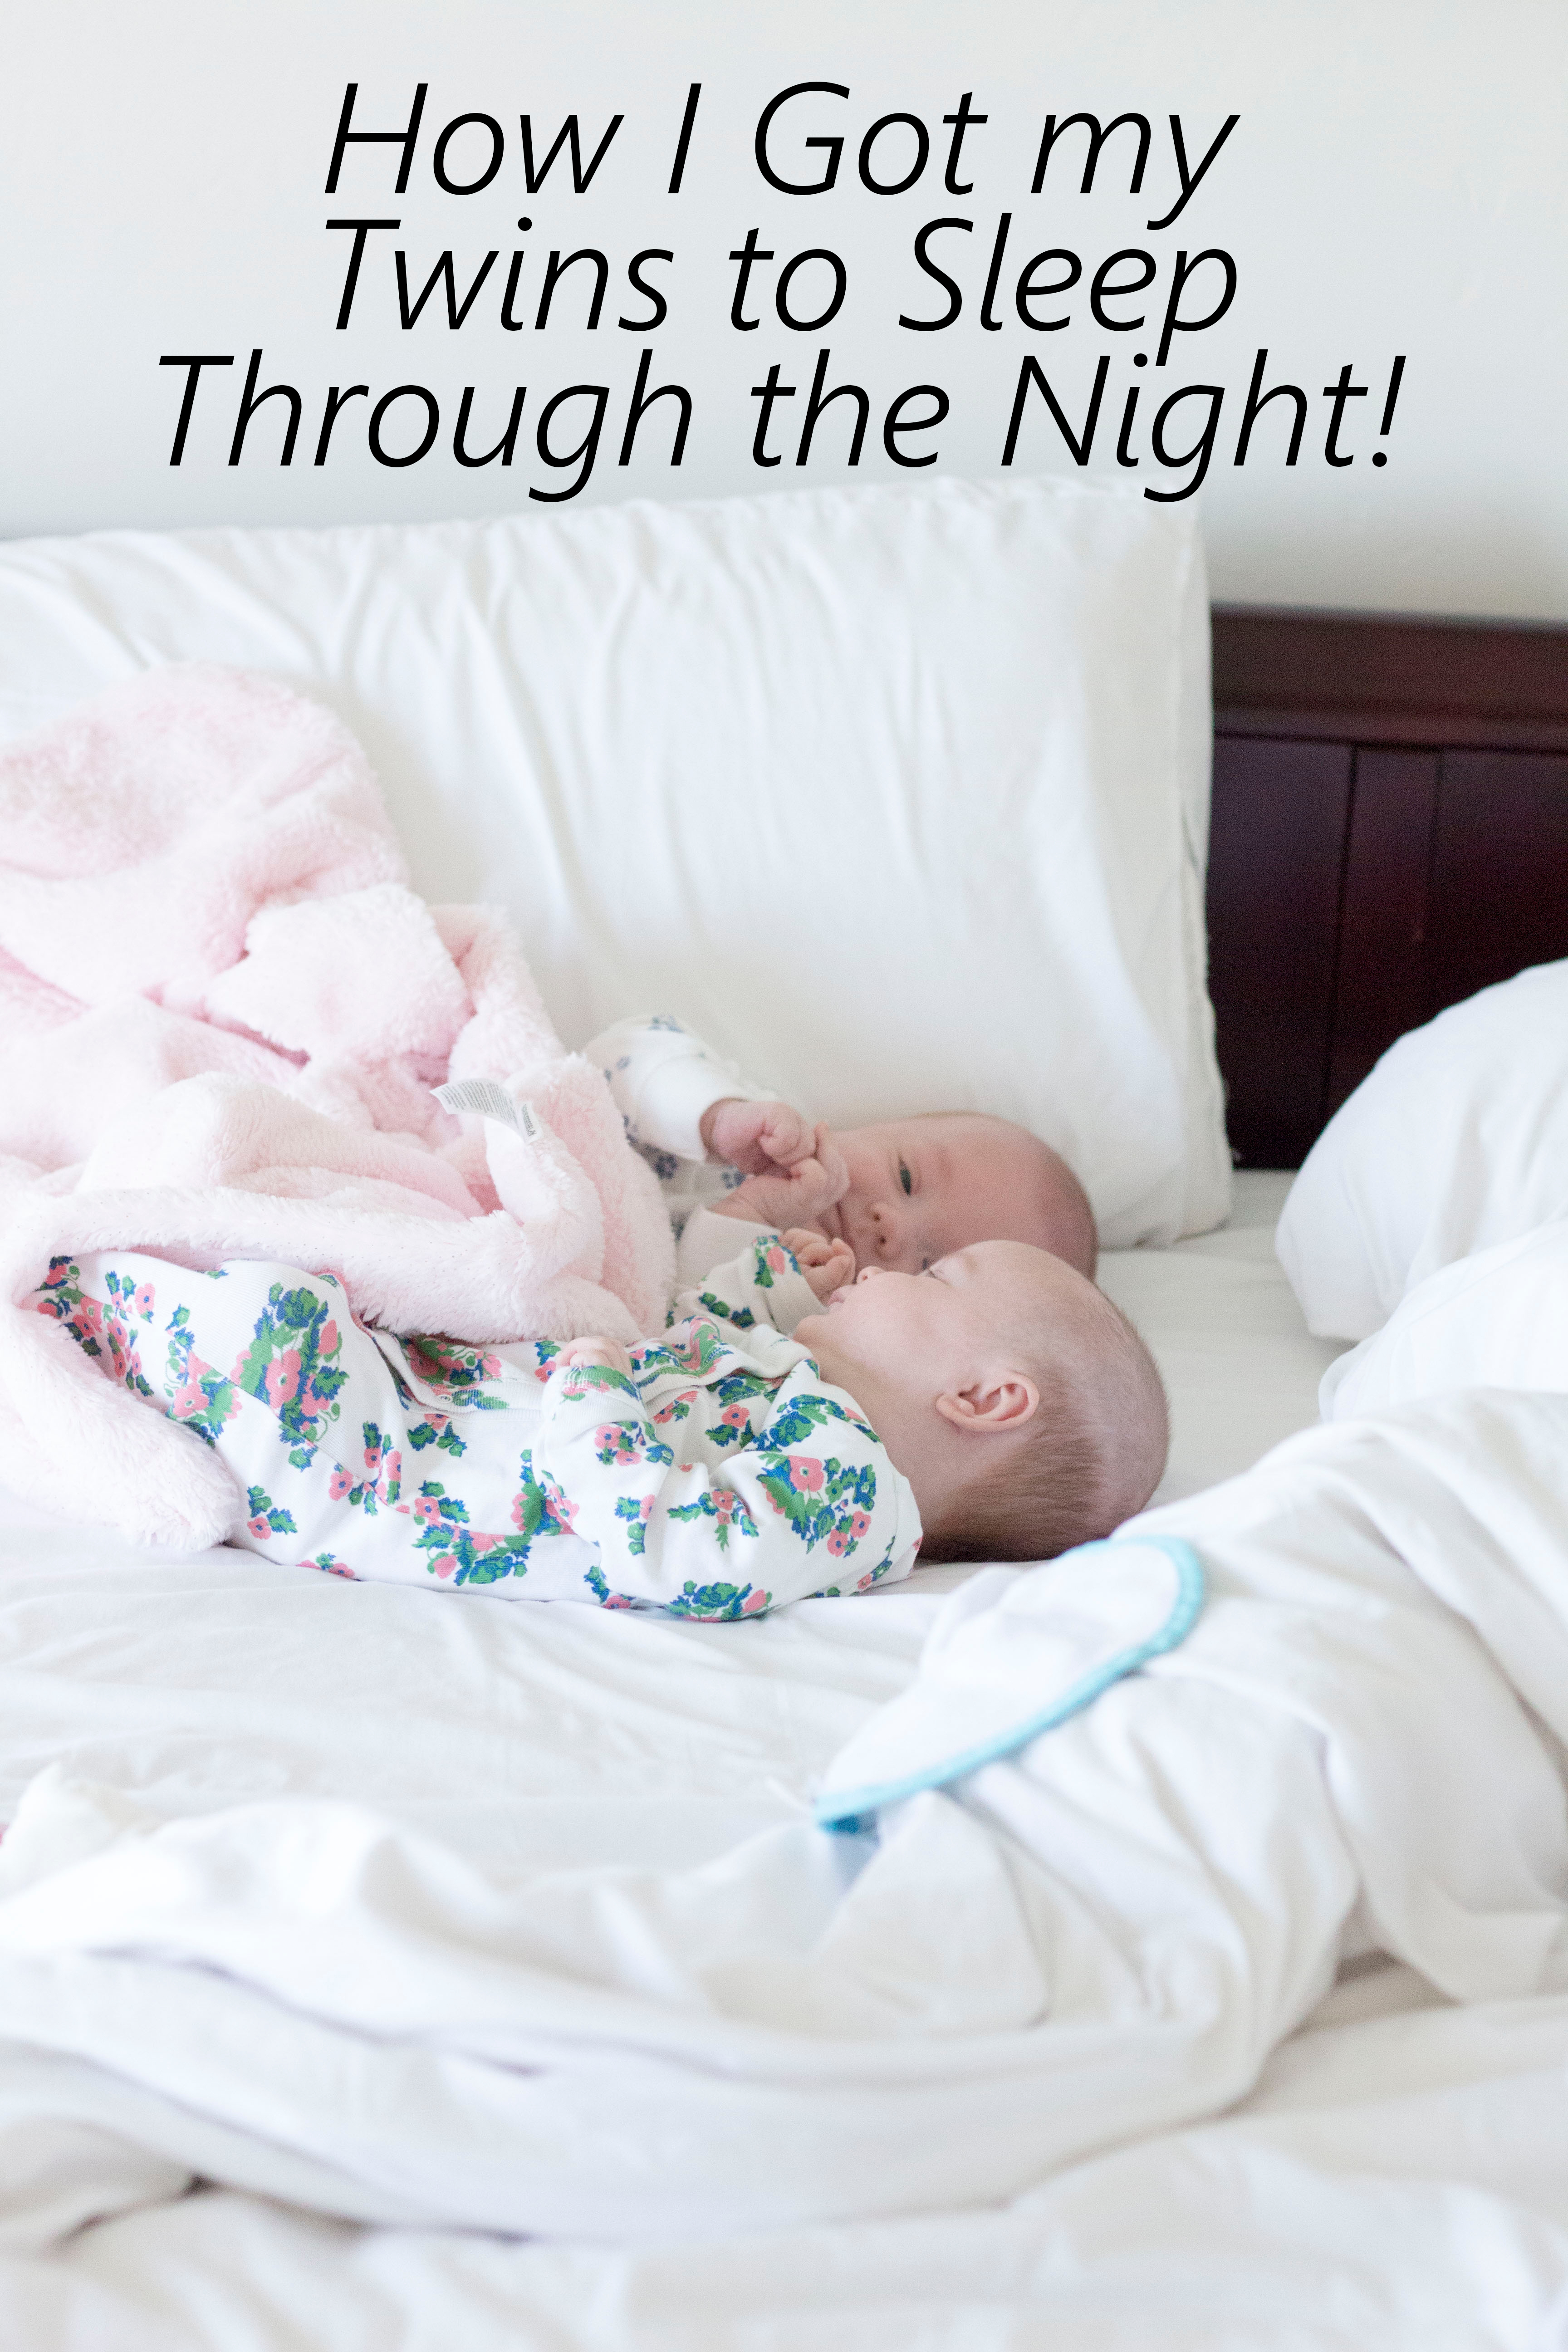 How to Get Twins to Sleep Through the Night